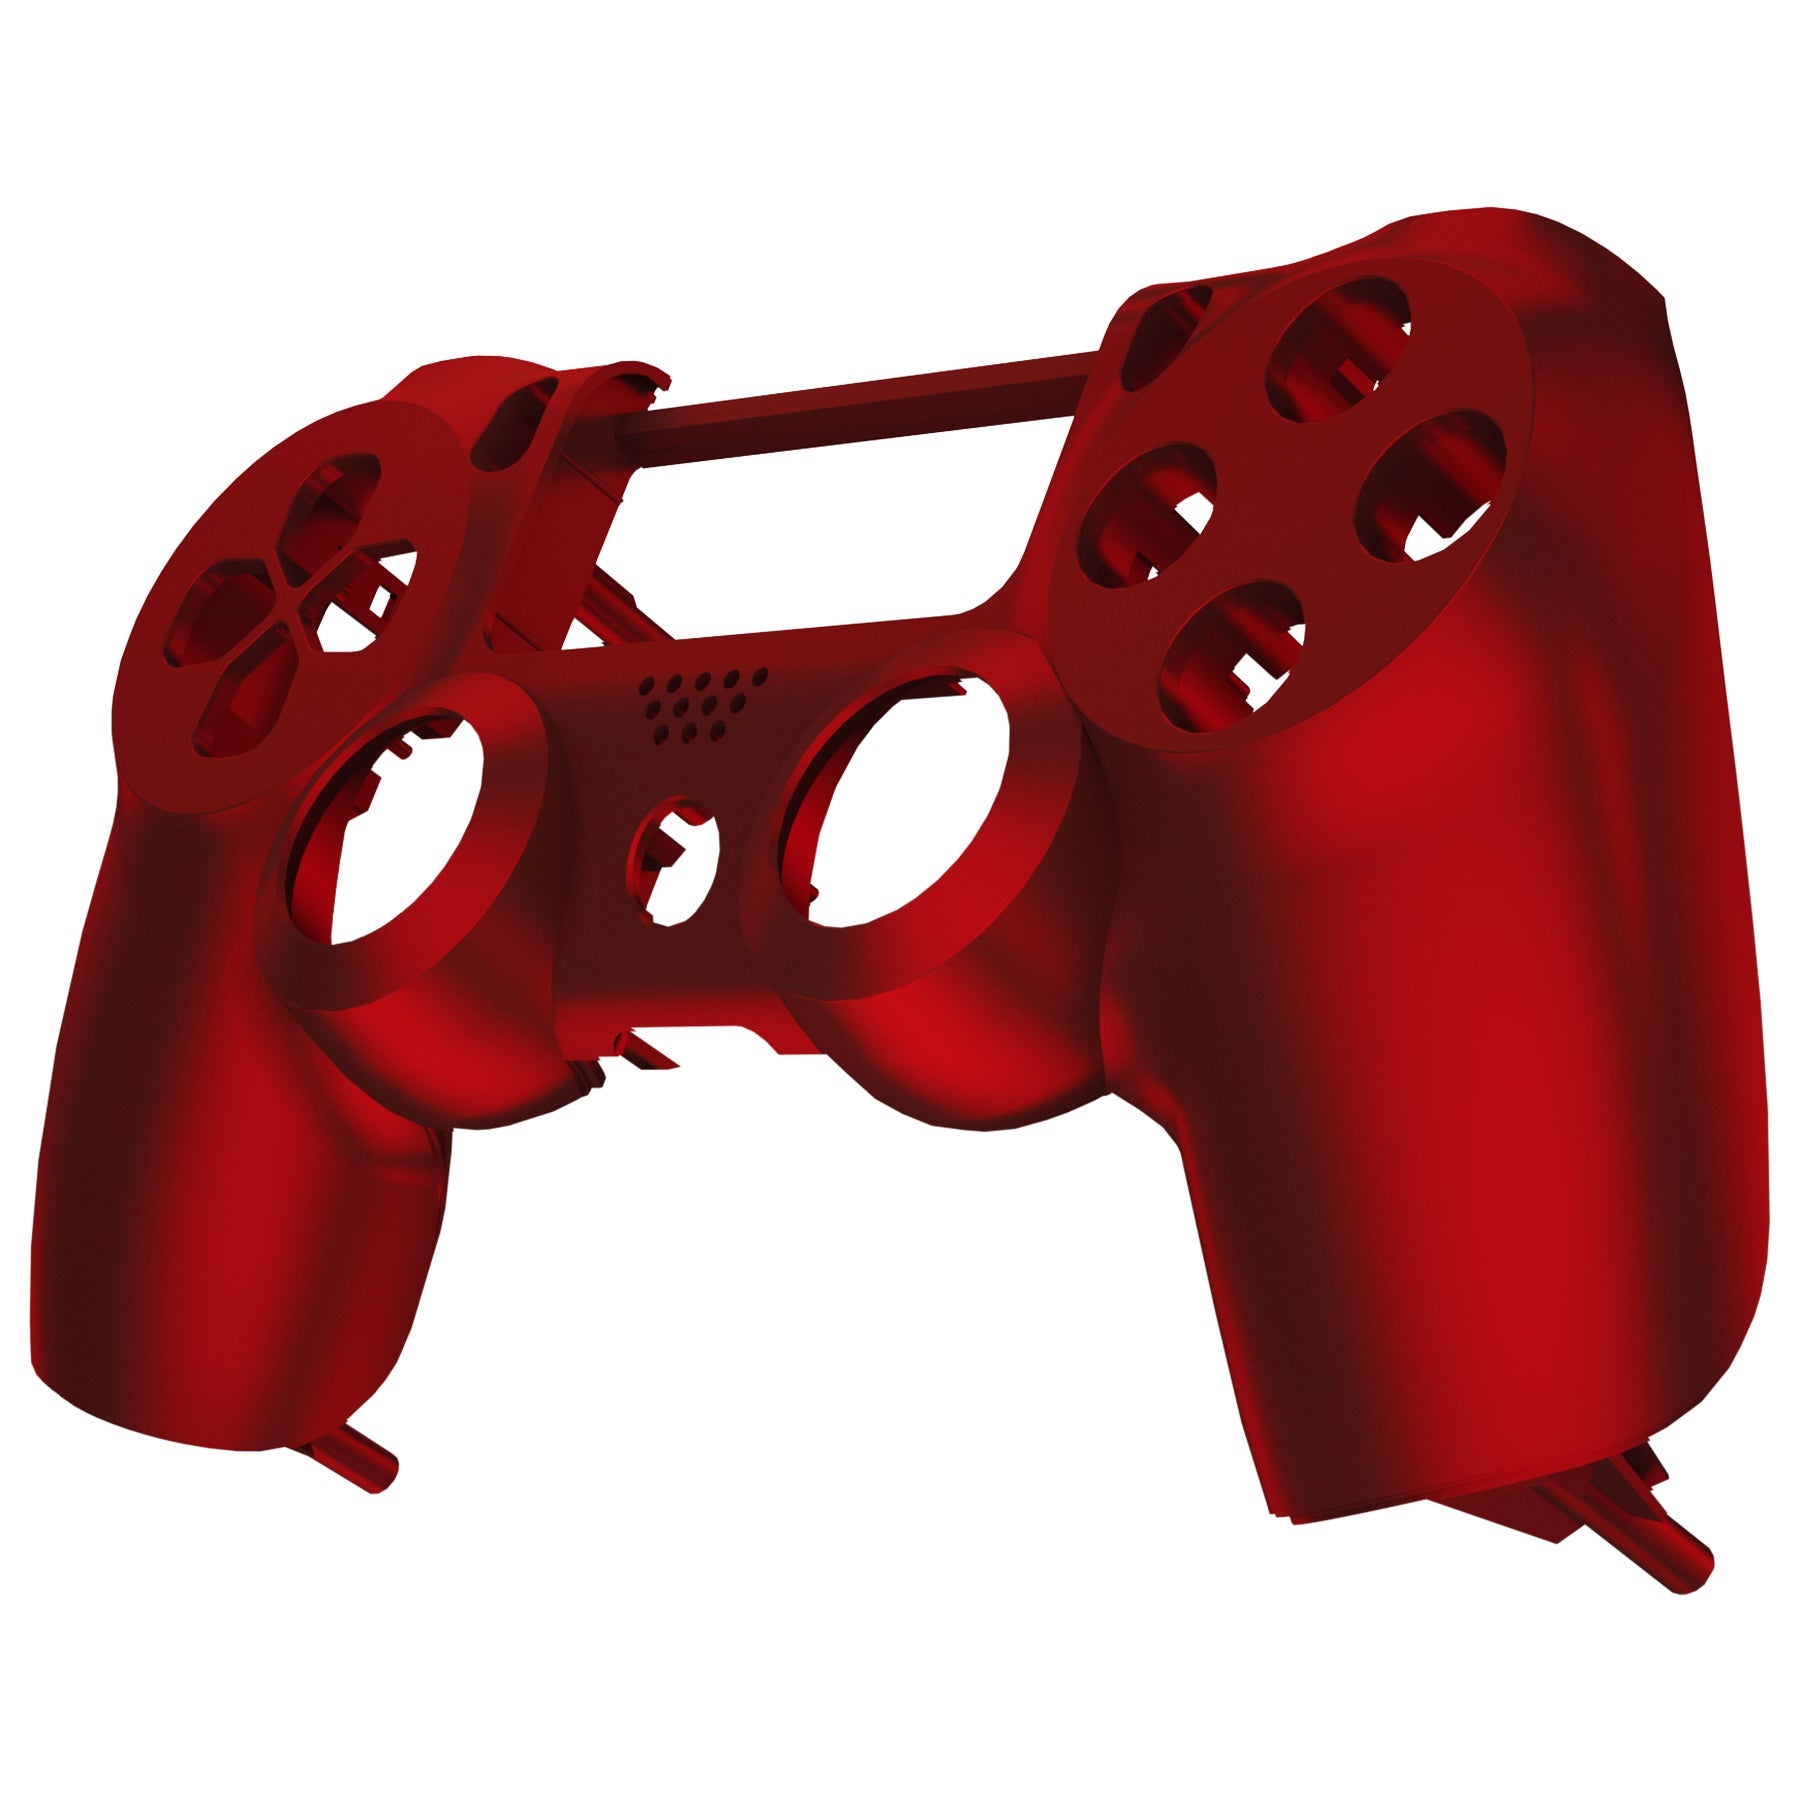 eXtremeRate Retail Red Soft Touch Face Plate Front Shell Custom Kits for ps4 Controller - P4MSF01